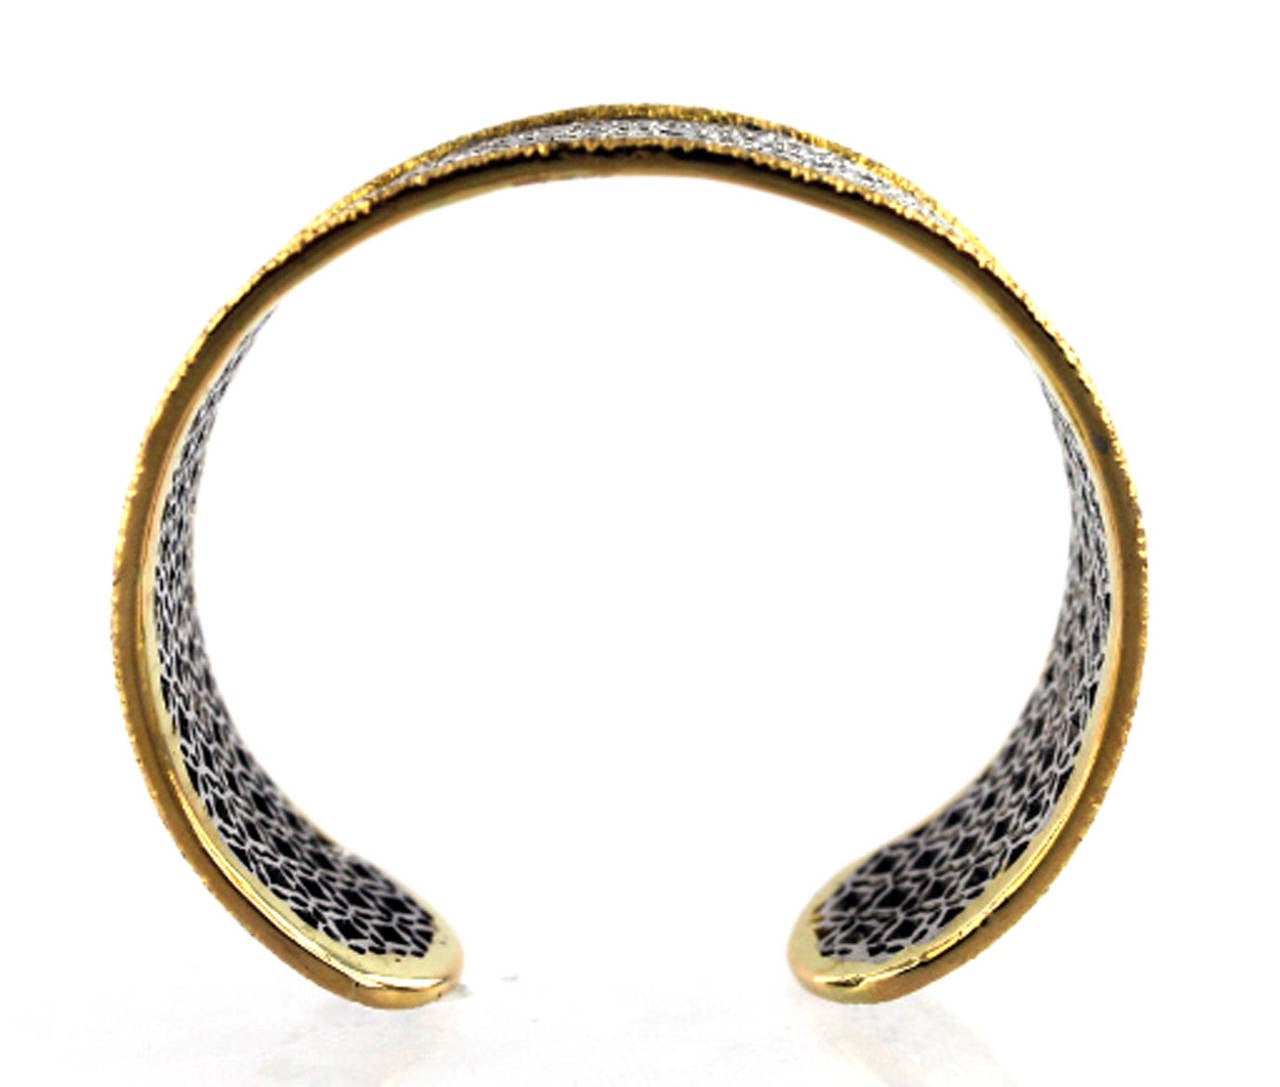 This stunning cuff bracelet has diamonds set in 18 karat white gold, and an 18 karat yellow gold trim.  There are approximately 5.46 carats of round brilliant cut diamonds. The yellow gold textured trim is simple, but creates dimension and character